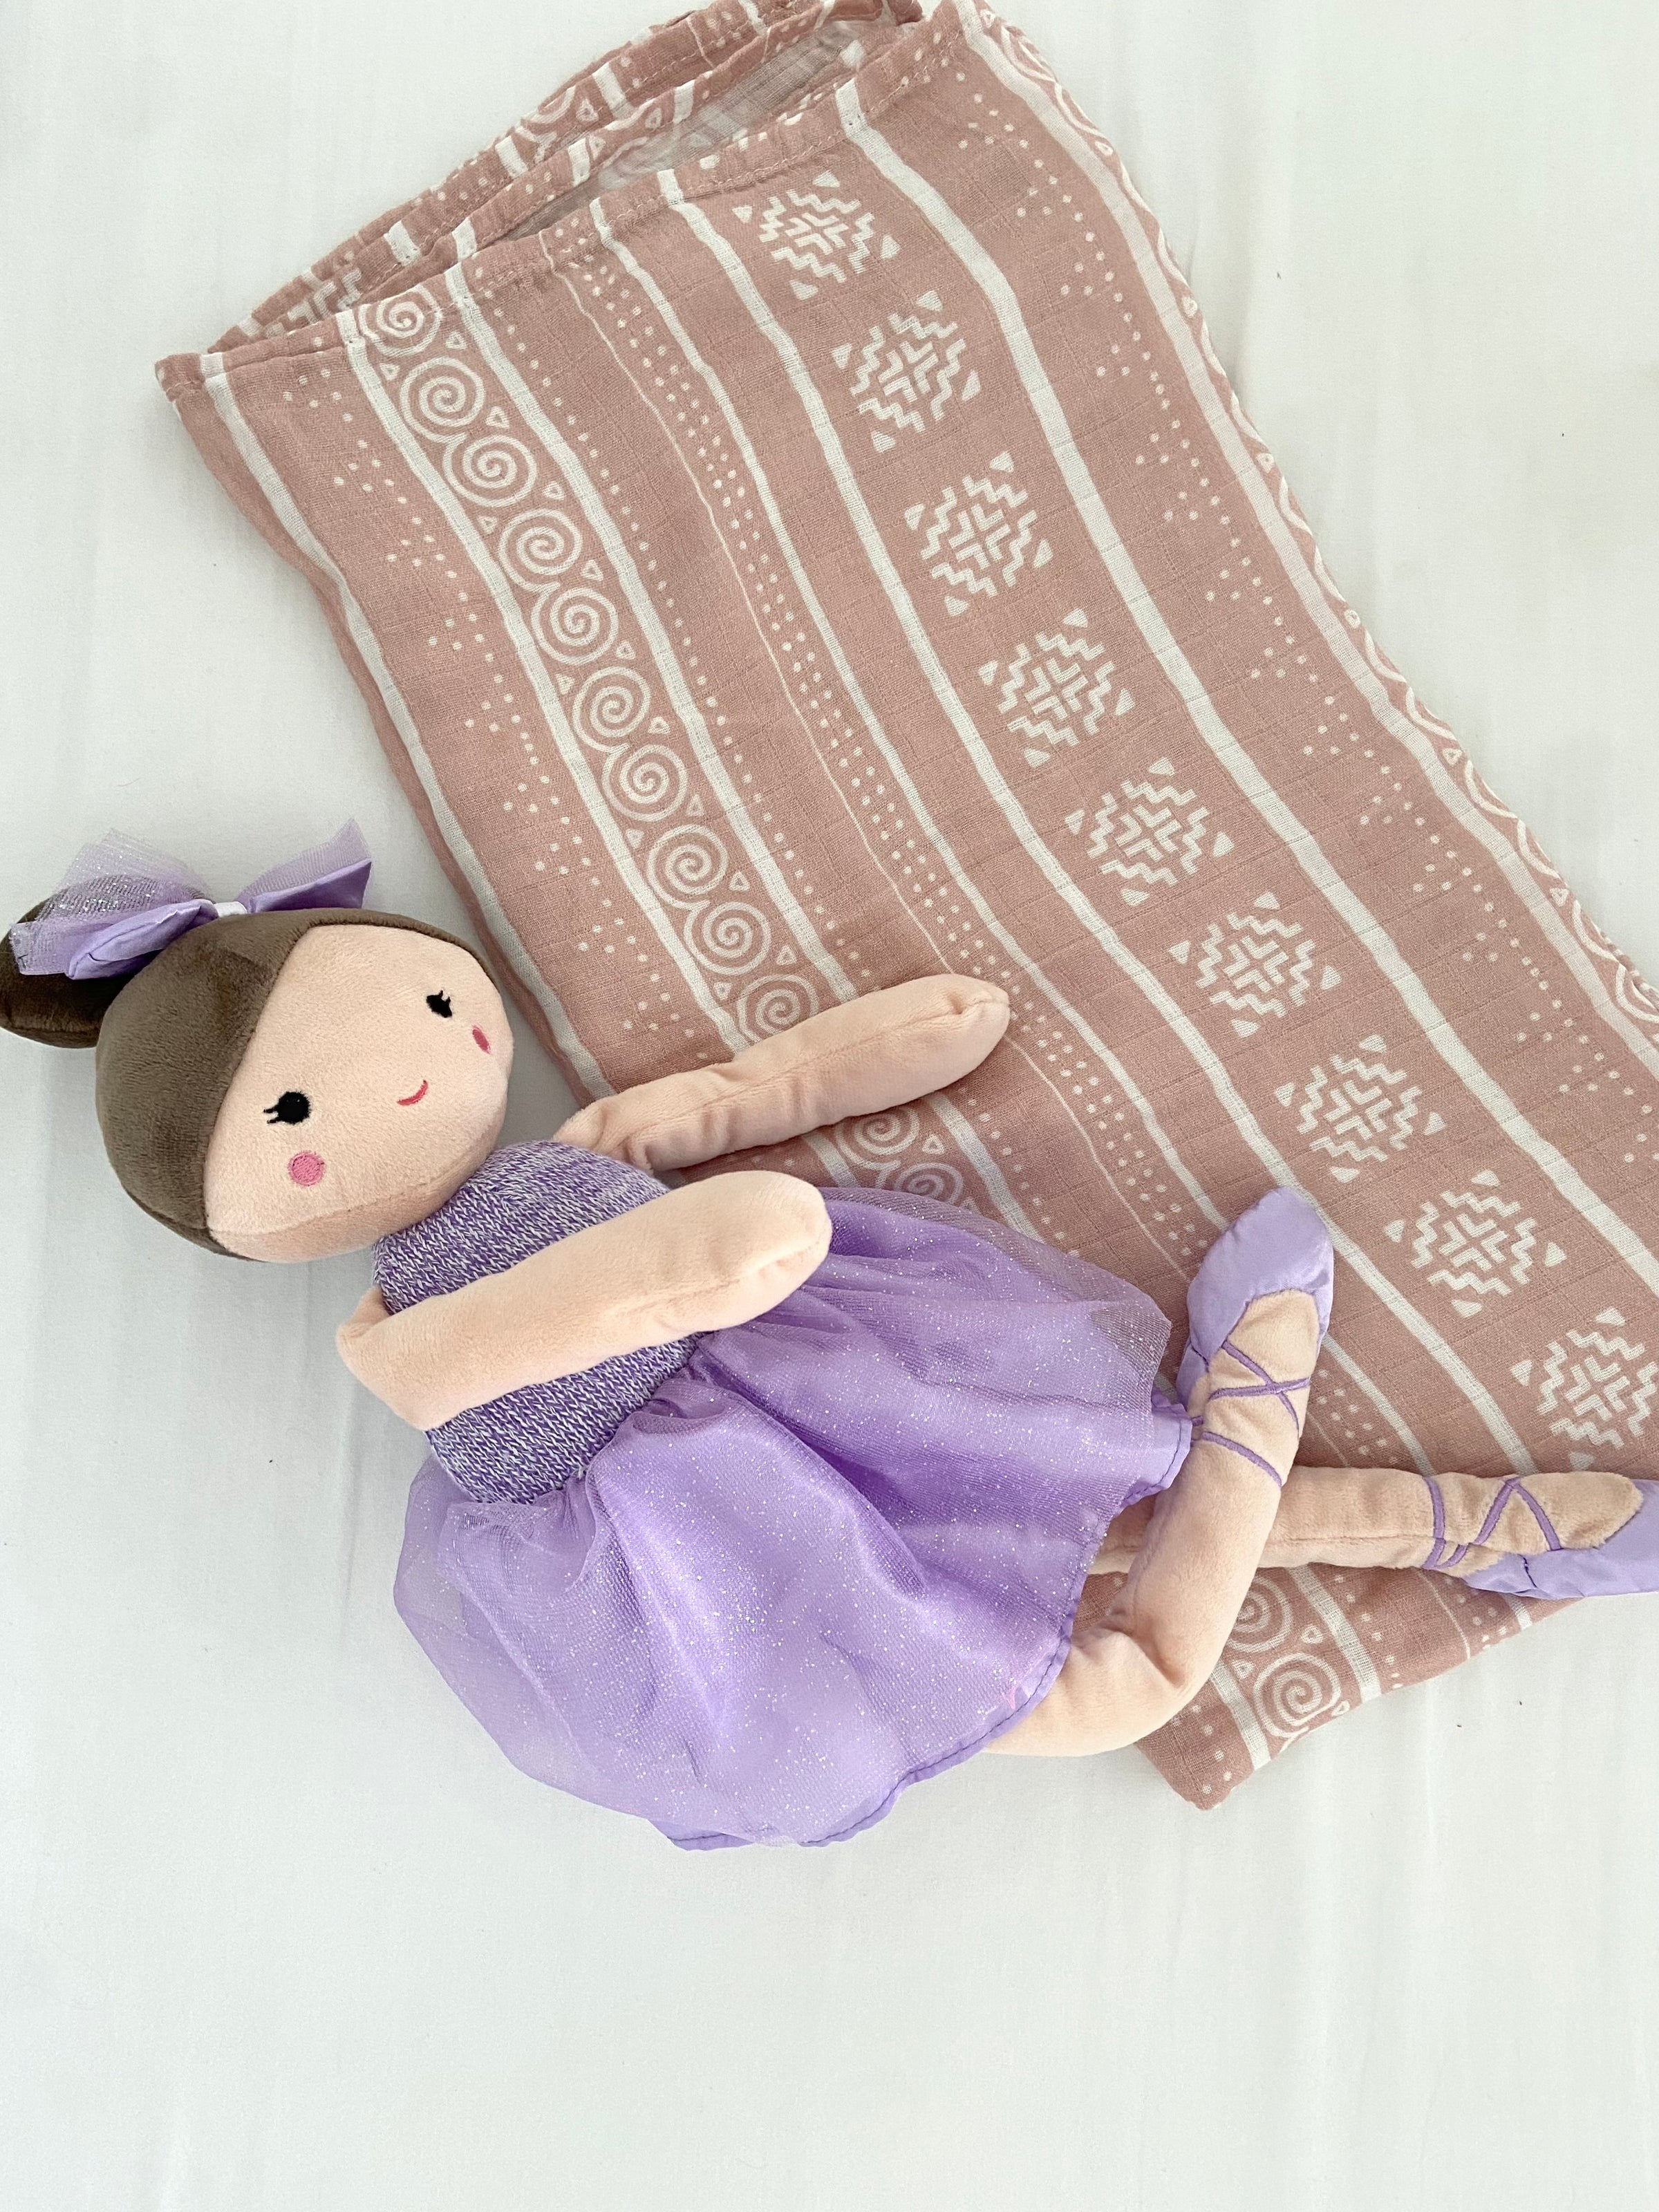 The muslin swaddle is perfect for any nursery and extremely soft to the touch.